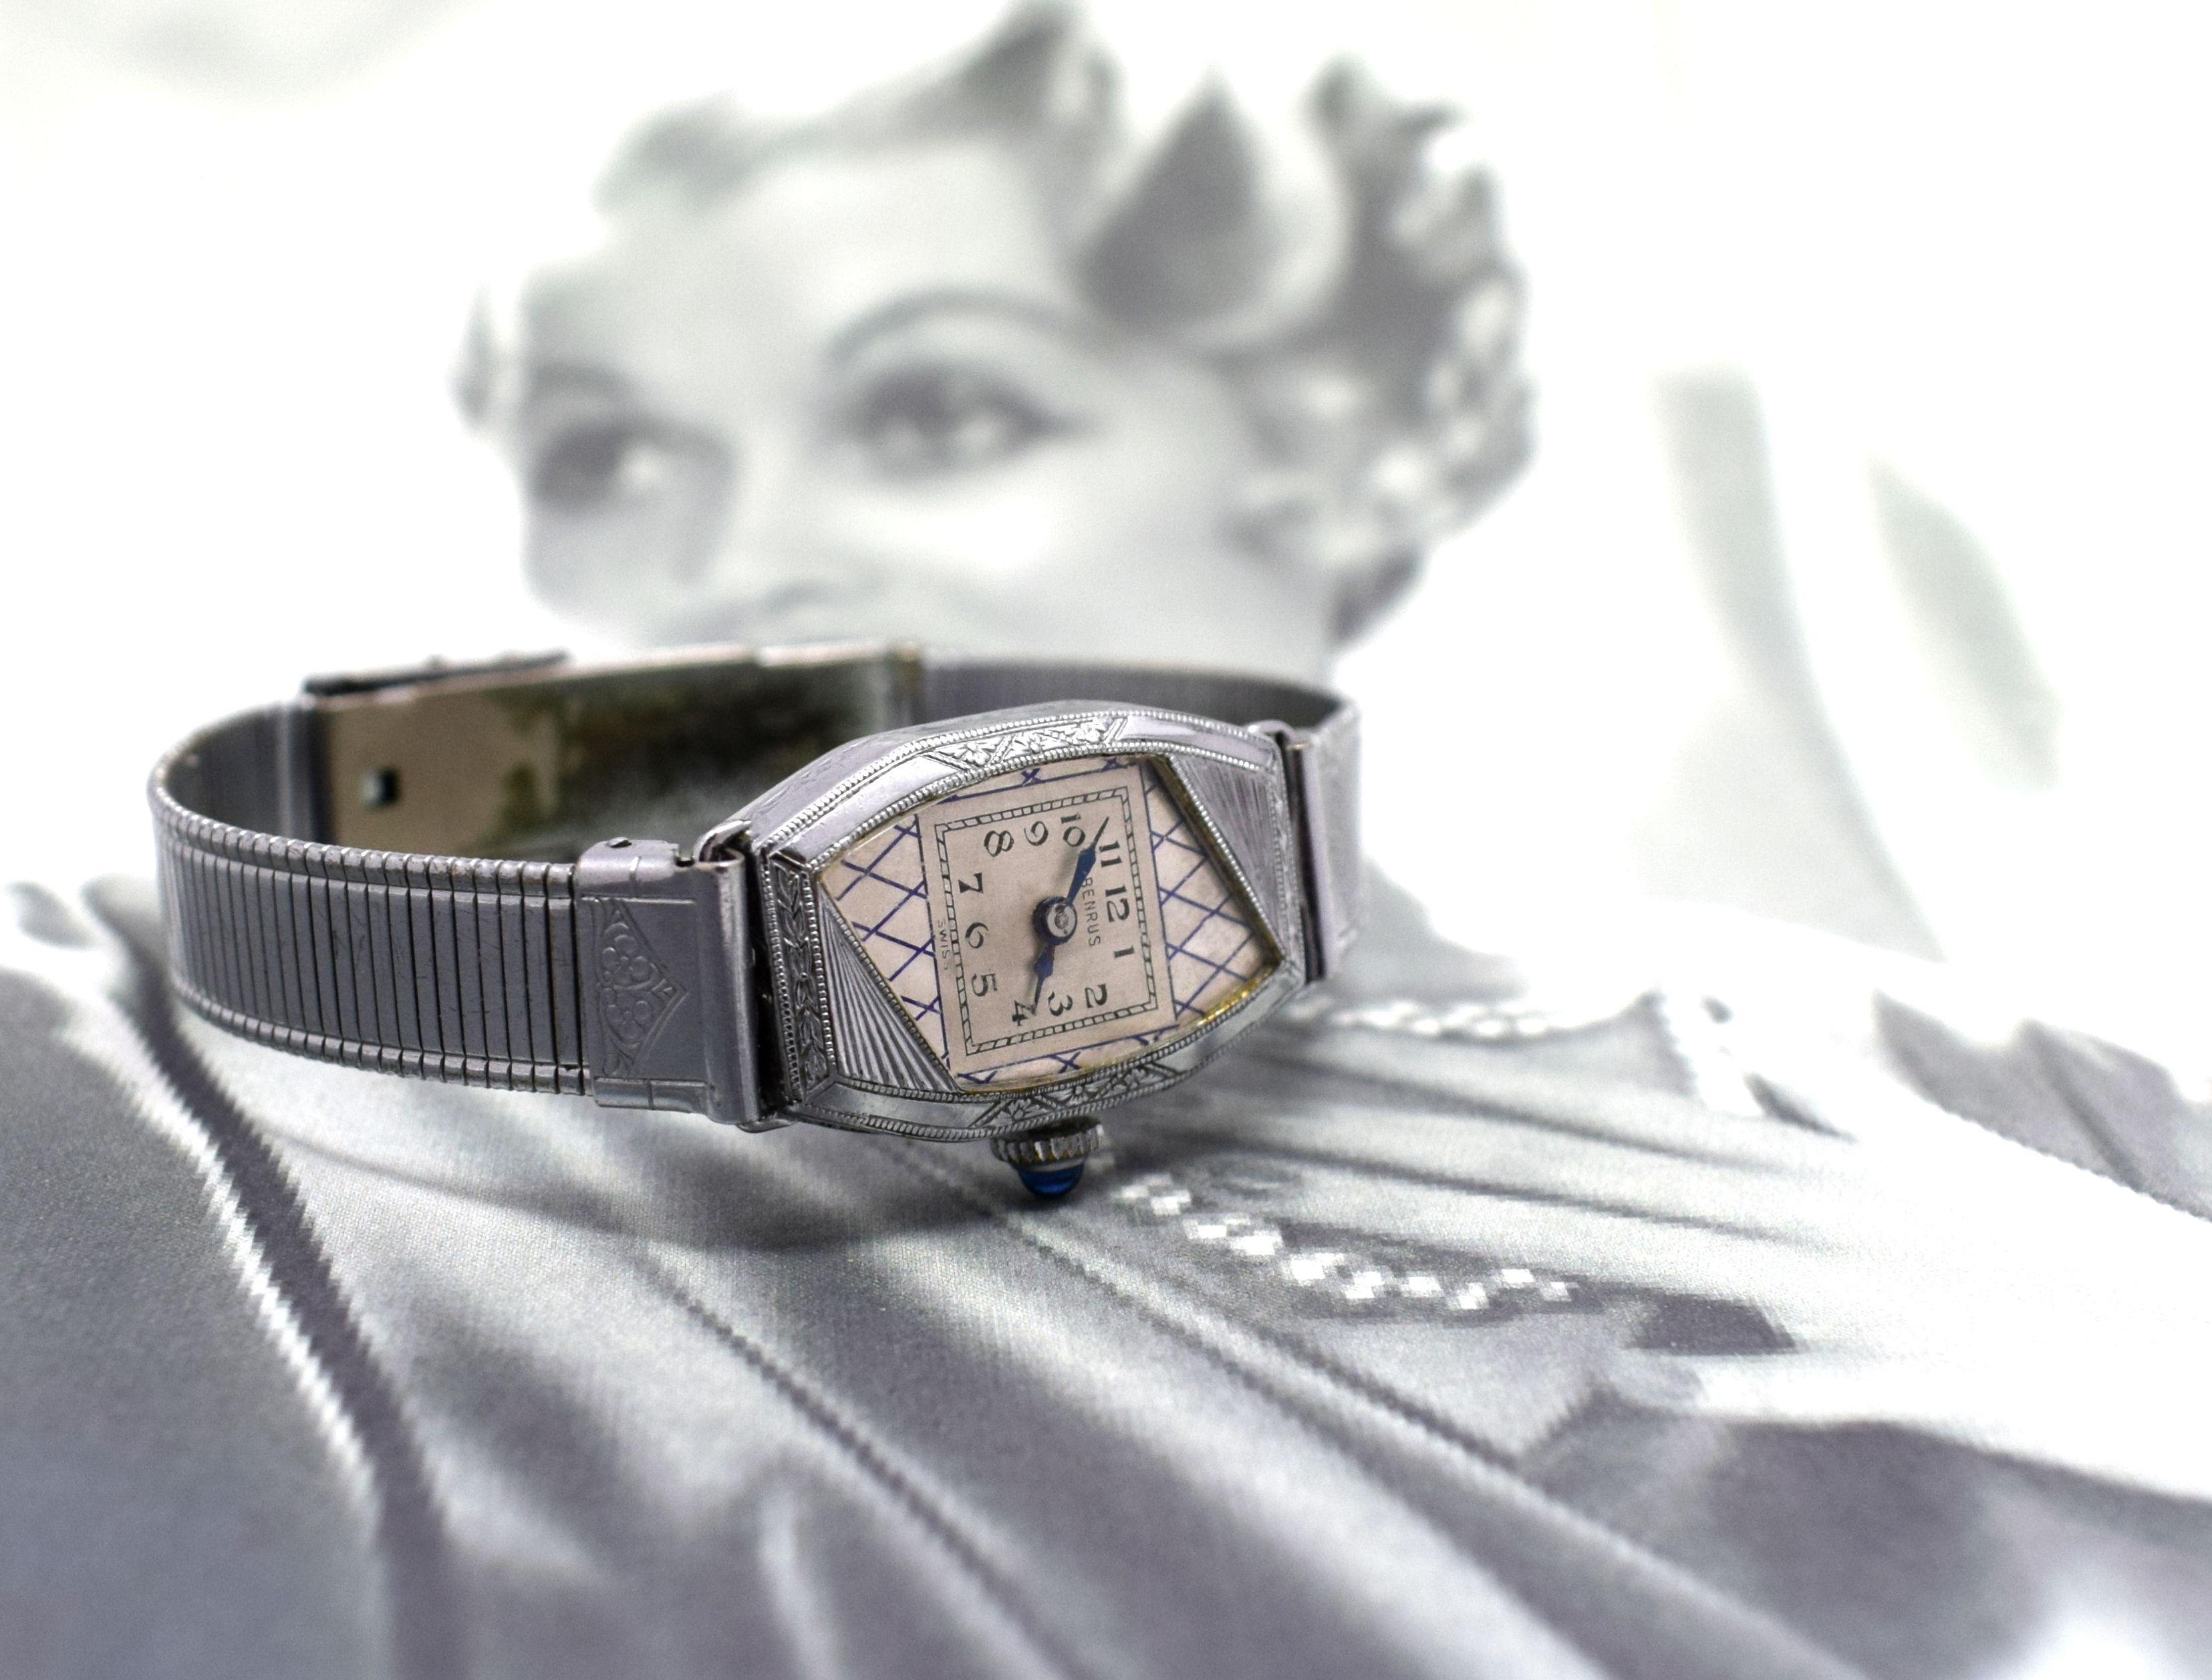 Wonderful Art Deco enamel two-tone ladies watch with a mesh band made by Benrus, a Swiss manual wind movement. This is a fine classic caliber, running well on 15 jewels. The movement is working well and keeping good time having been recently